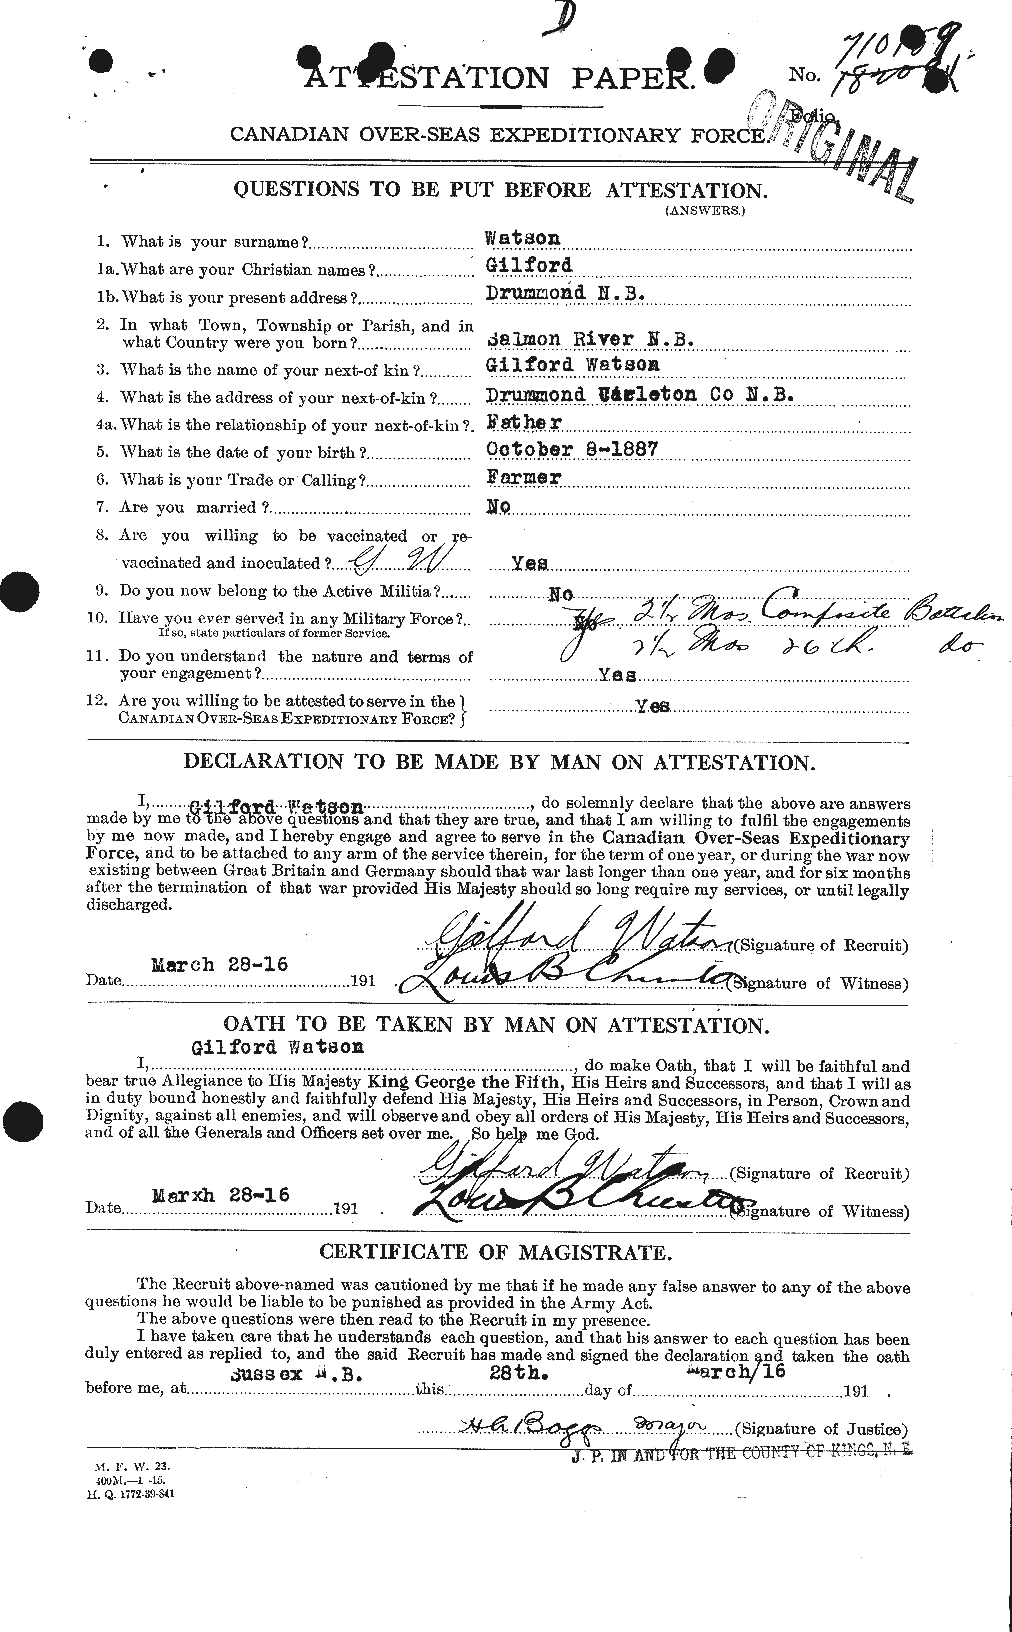 Personnel Records of the First World War - CEF 658779a